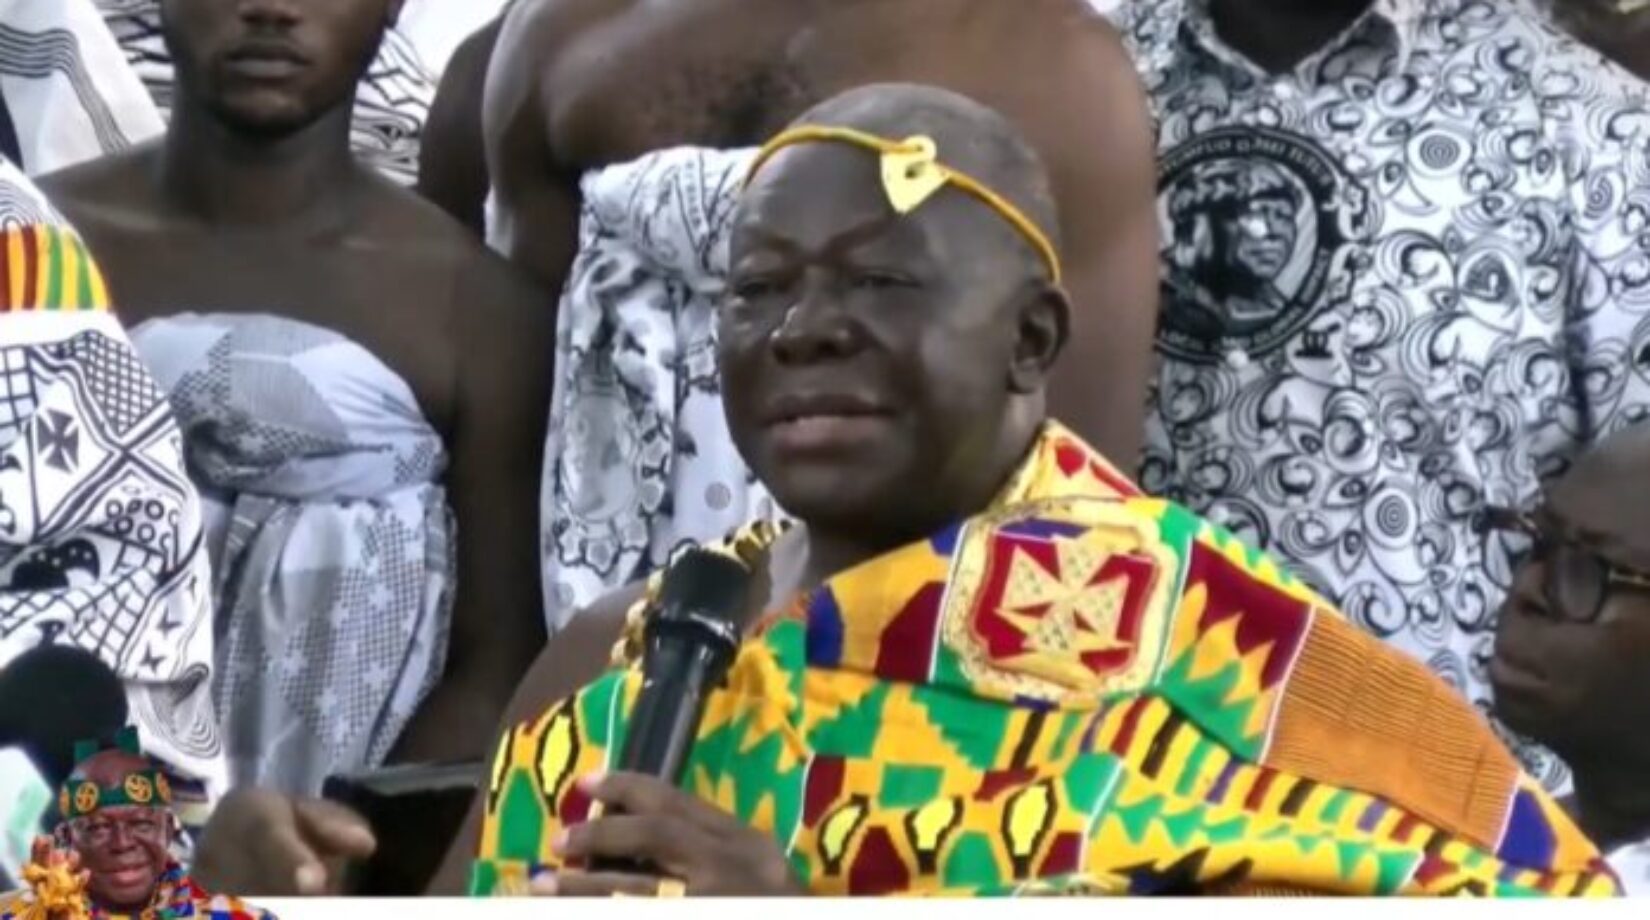 Otumfuo discloses top secret…says his royal status was hidden from him for better grooming